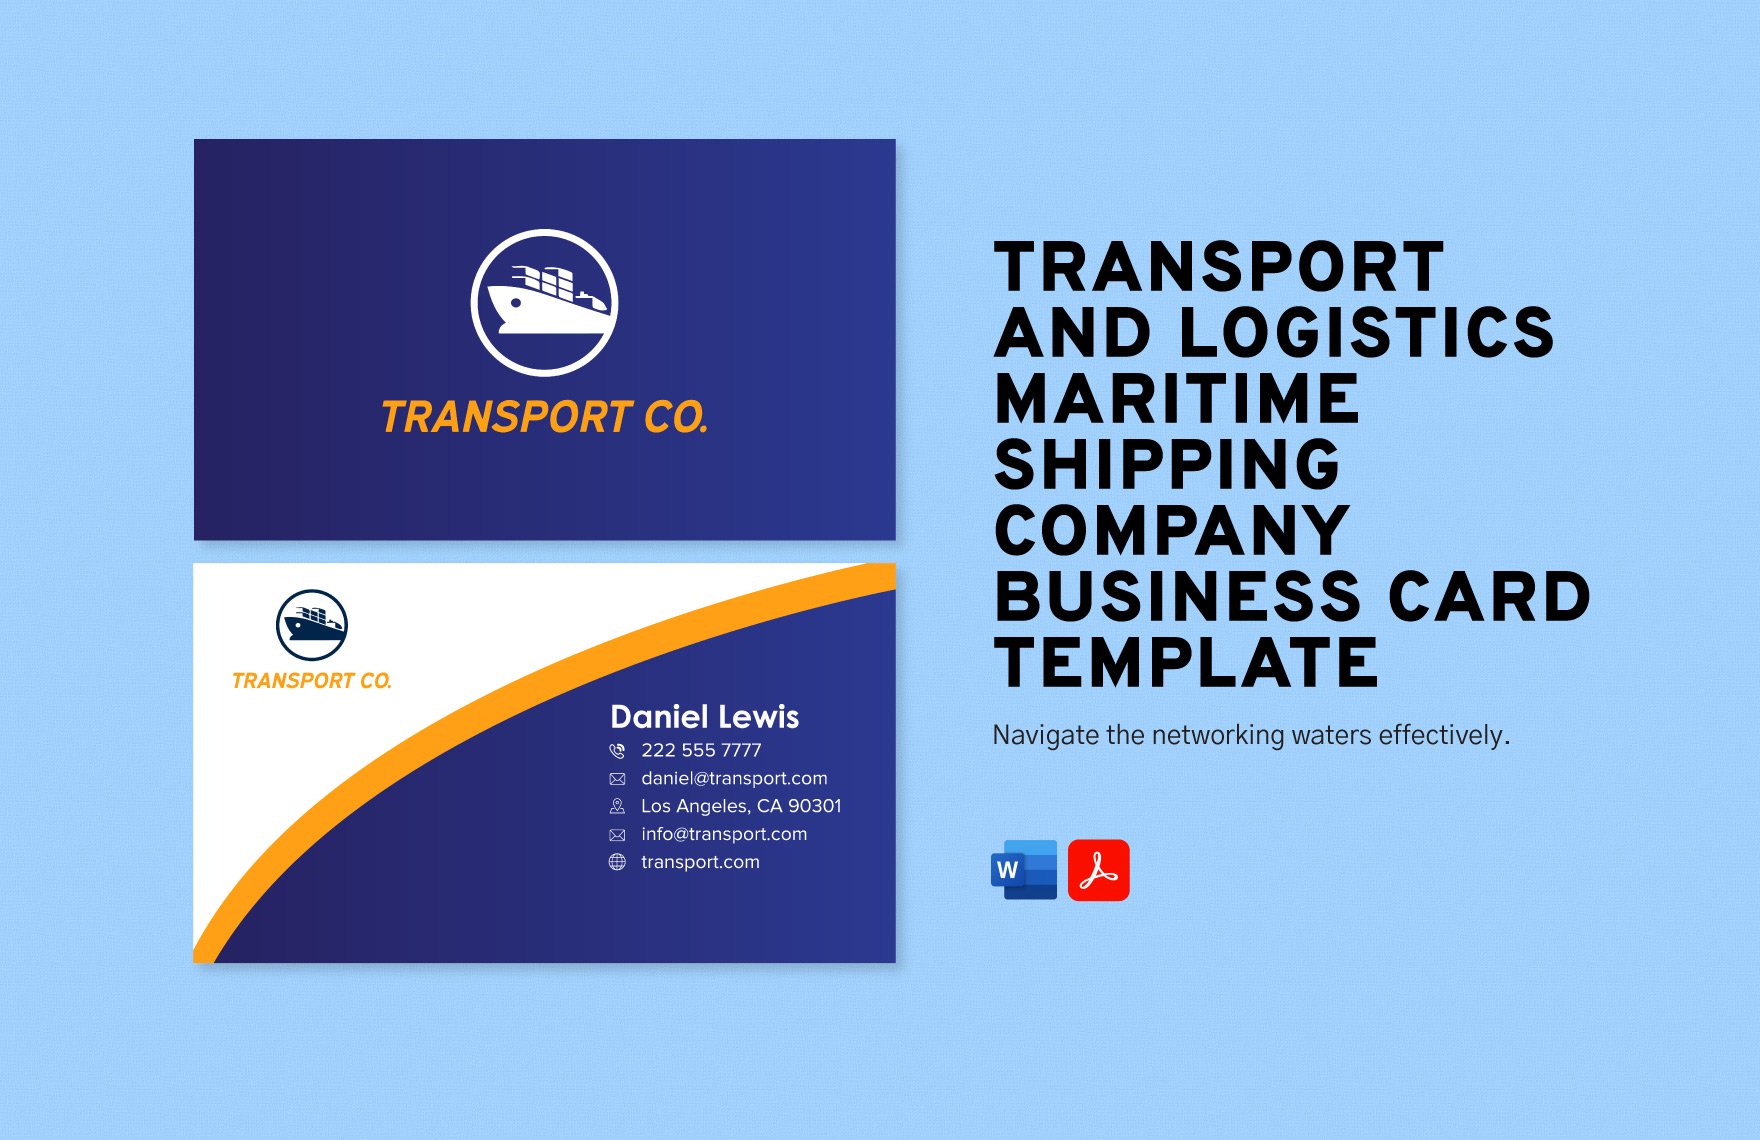 Transport and Logistics Maritime Shipping Company Business Card Template in Word, PDF